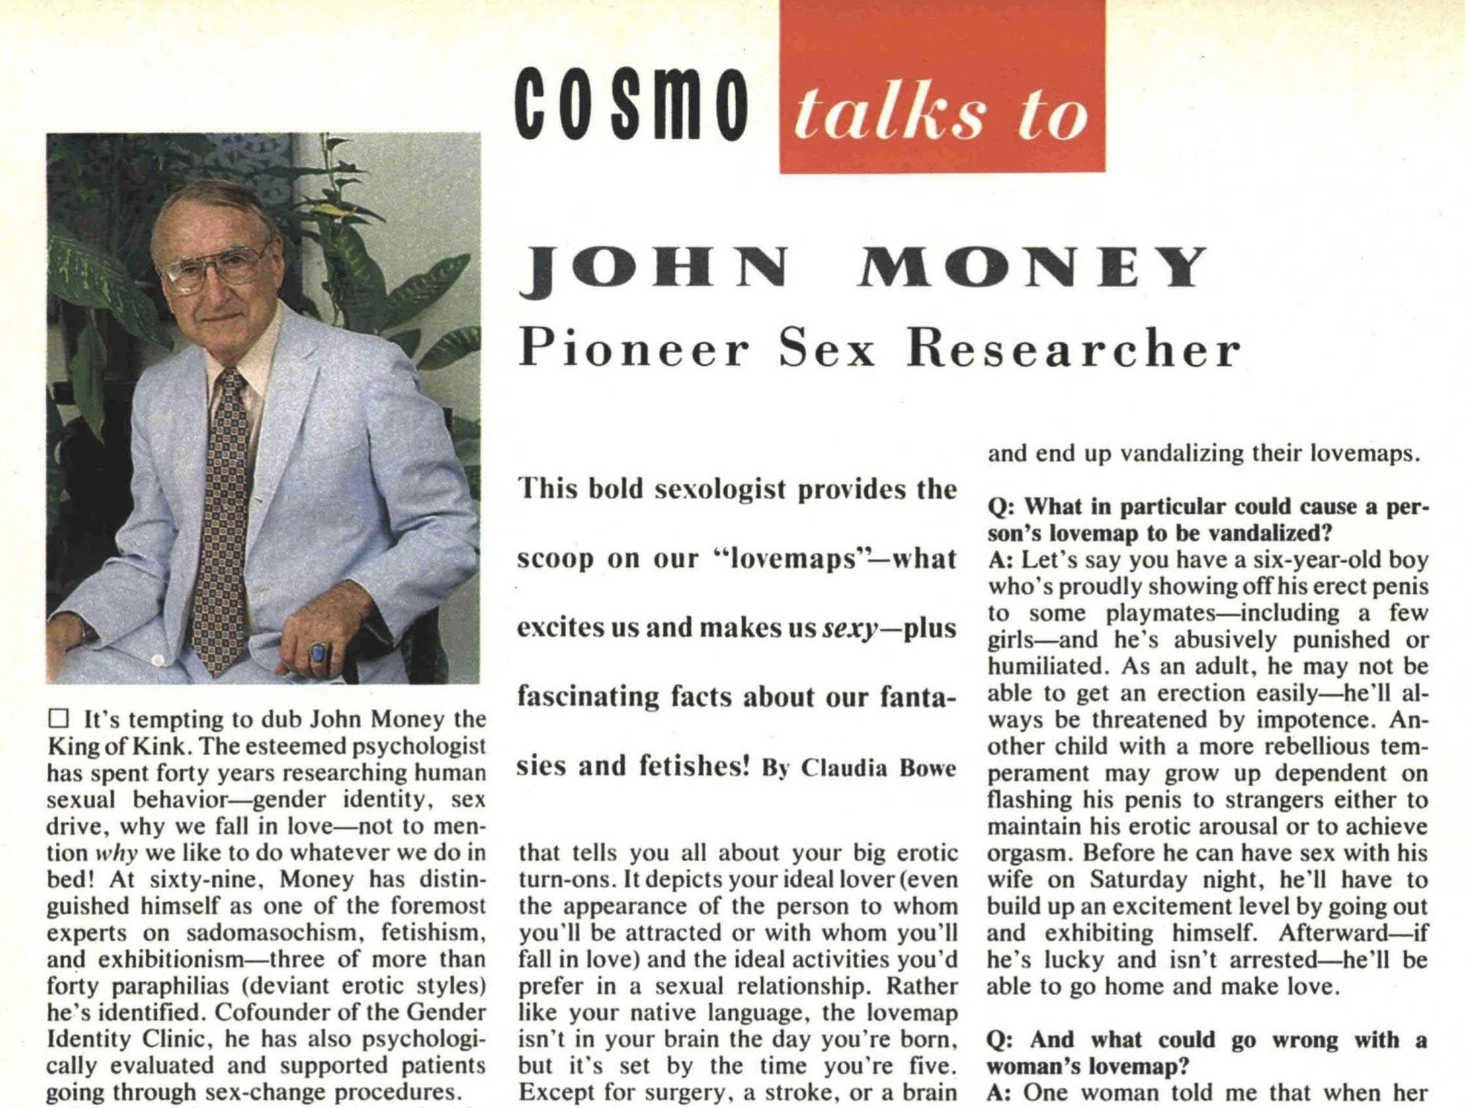 Screenshot of a page from Cosmopolitan magazine, featuring a photograph of Money and an interview